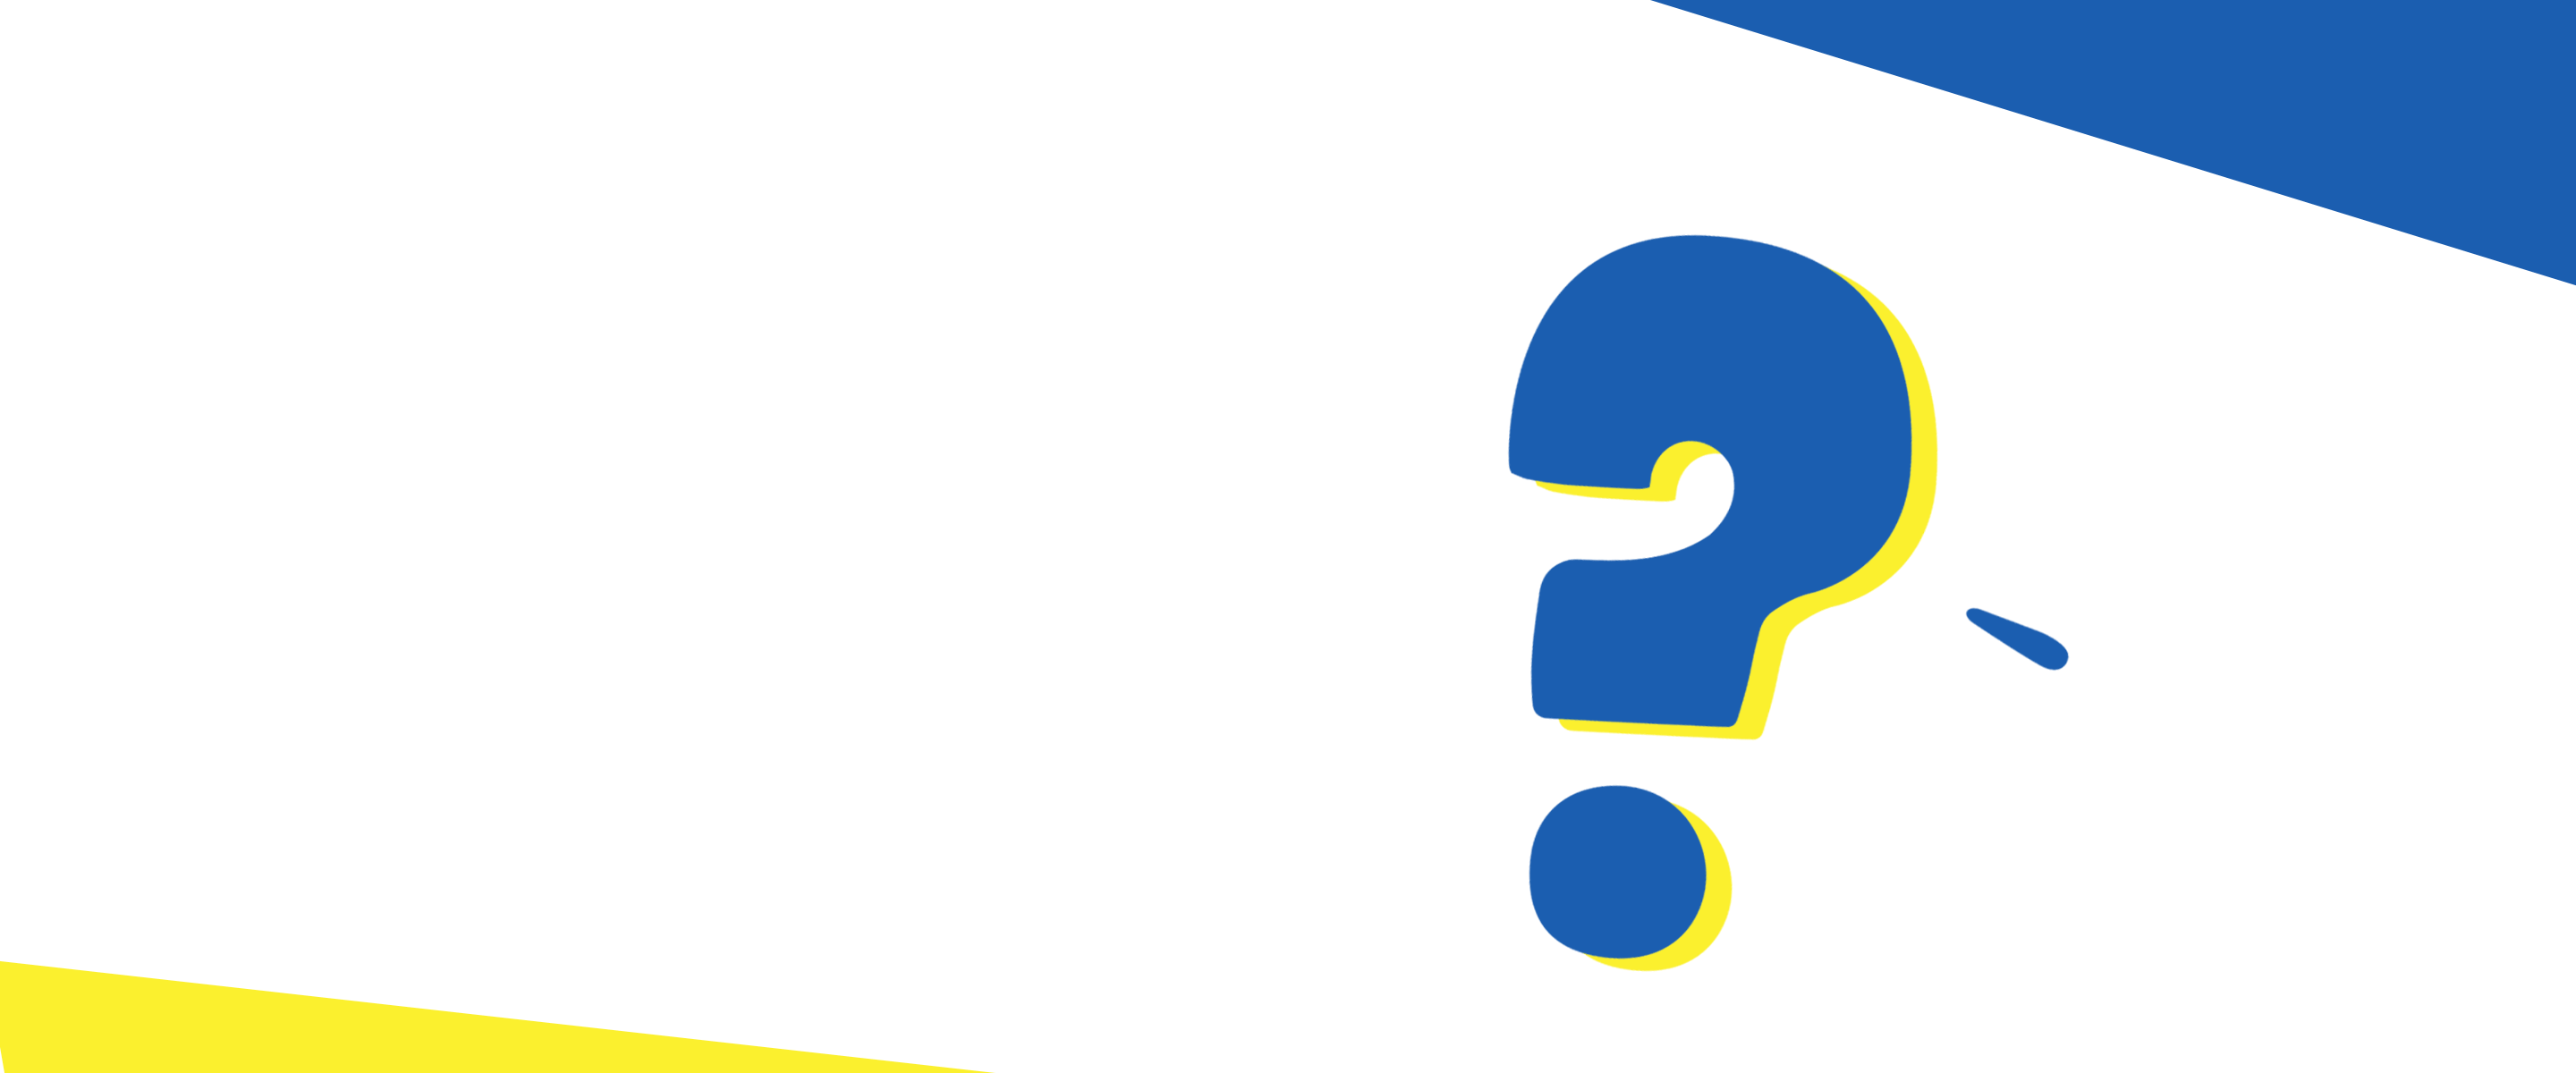 Blue and yellow digital question mark graphic. 